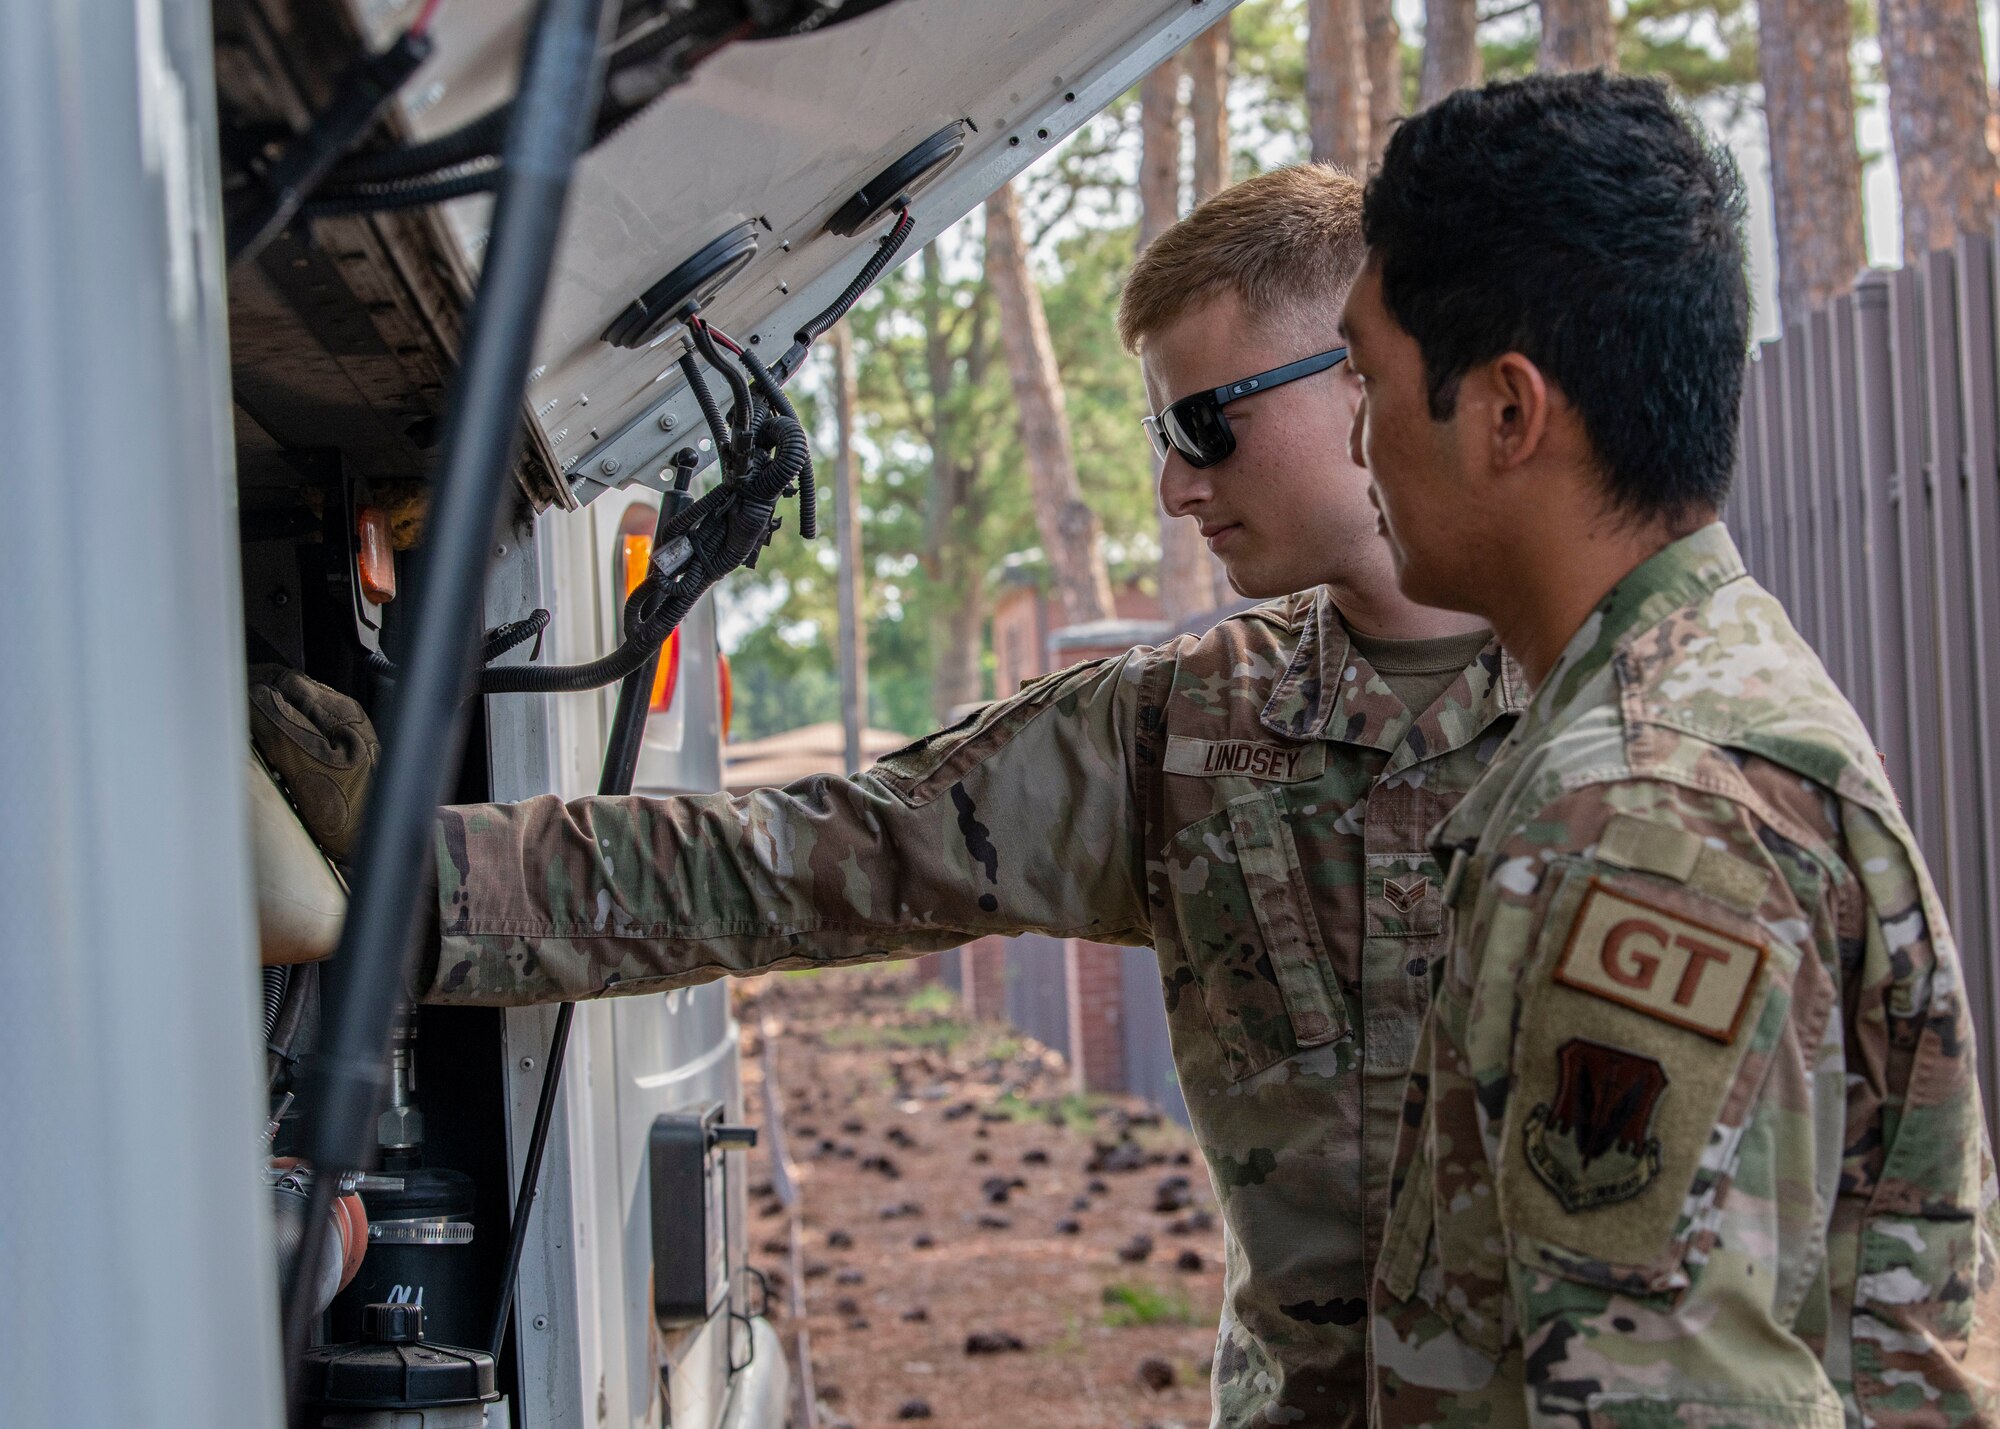 Senior Airman Remington Lindsey, 4th Logistics Readiness Squadron ground

transportation trainer, inspects a bus engine with Airman 1st Class Carl

Bautista, 4th LRS ground transportation operator, at Seymour Johnson Air

Force Base, North Carolina, July 14, 2022. The 4th LRS provides logistics

support for F-15E Strike Eagle aircraft and supports units across the base.

(U.S. Air Force photo by Airman 1st Class Sabrina Fuller.)